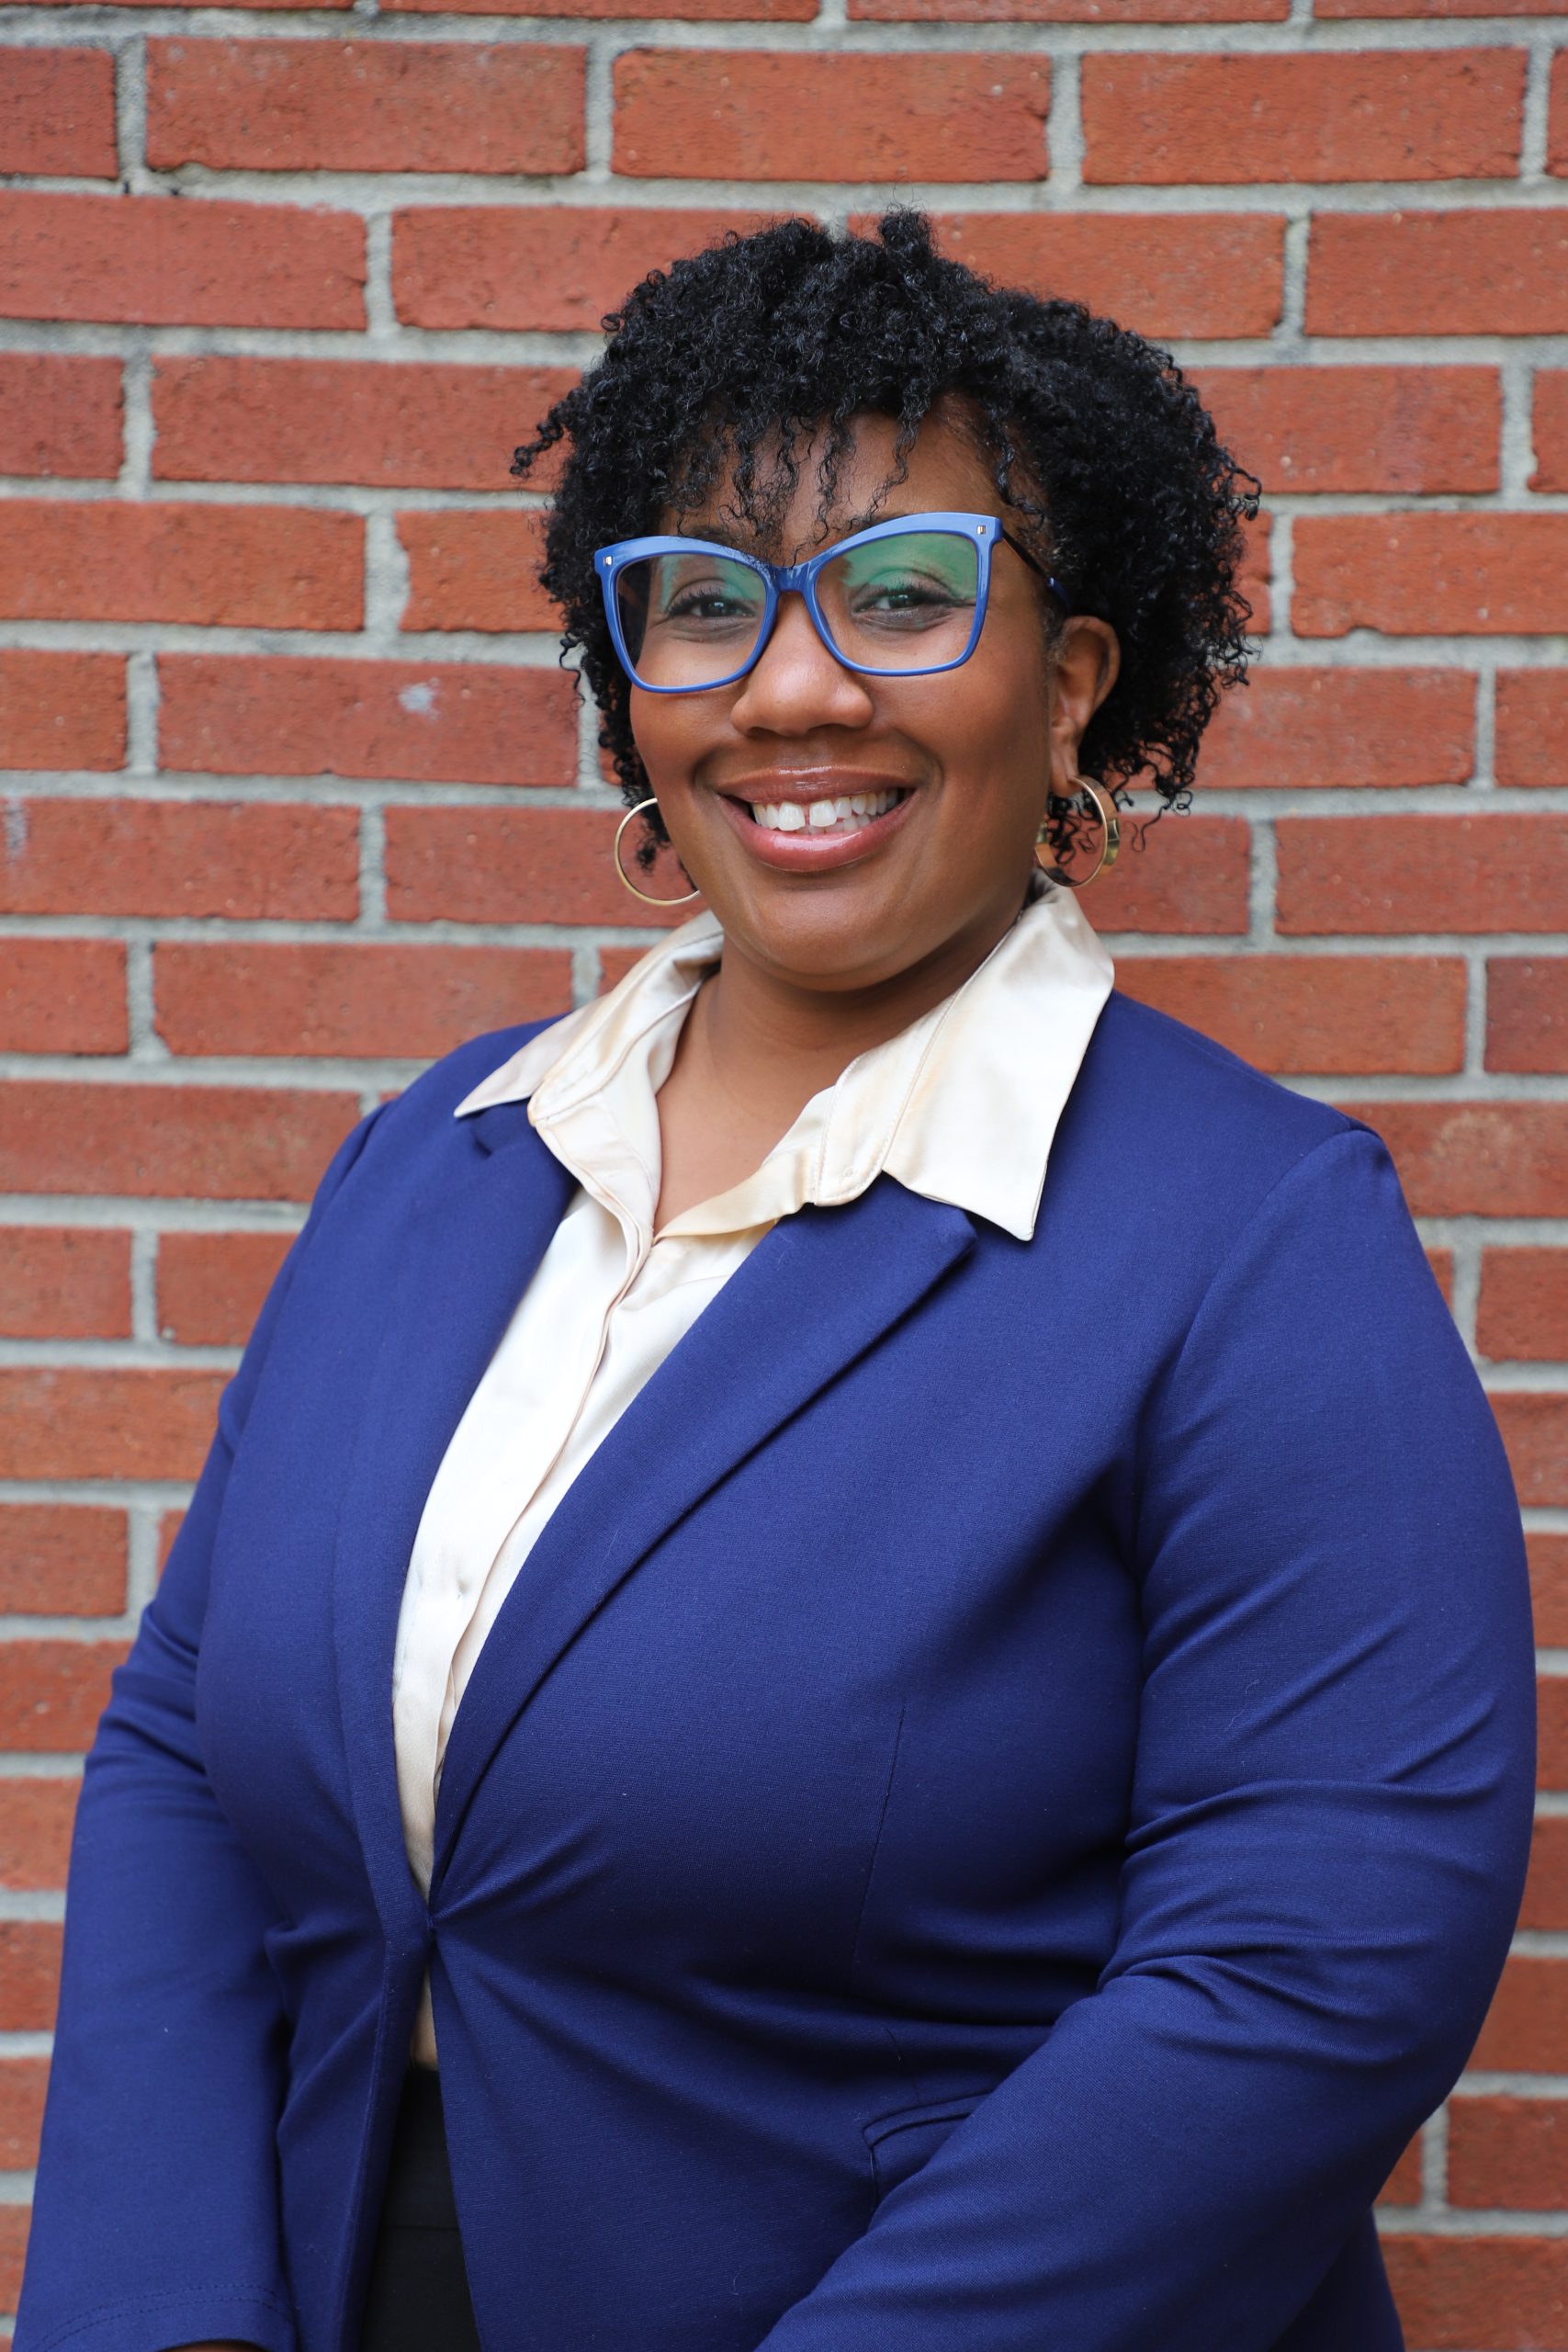 Green named principal of Carolina Springs Middle School - Who's On The Move